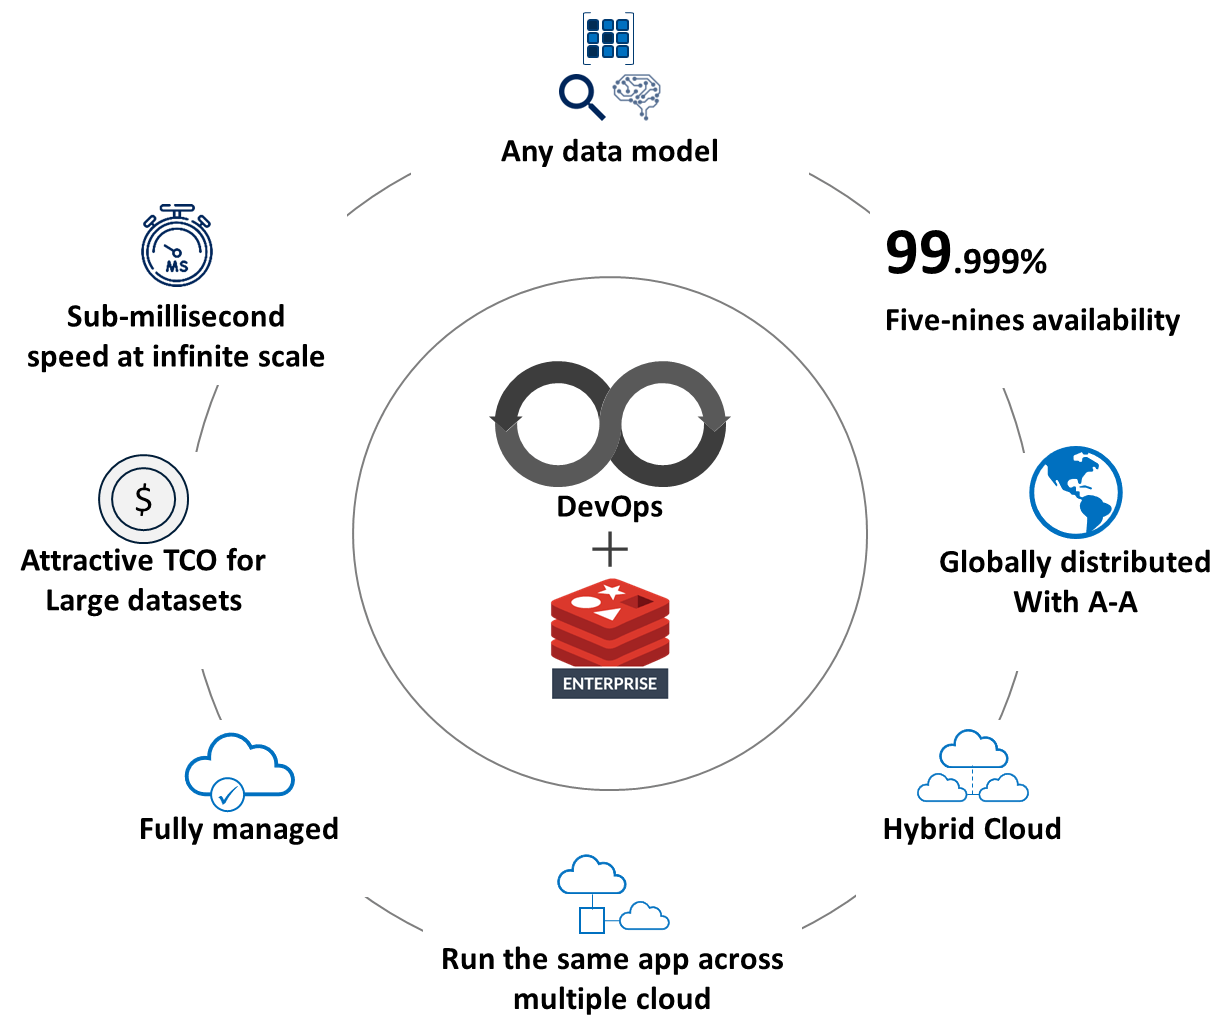 DevOps + Redis Enterprise features: Any data model; Five-nines availability; Globally distributed with A-A; Hybrid Cloud; Run the same app across multiple cloud; Fully managed; Attractive TCO for Large datasets; Sub-millisecond speed at infinite scale